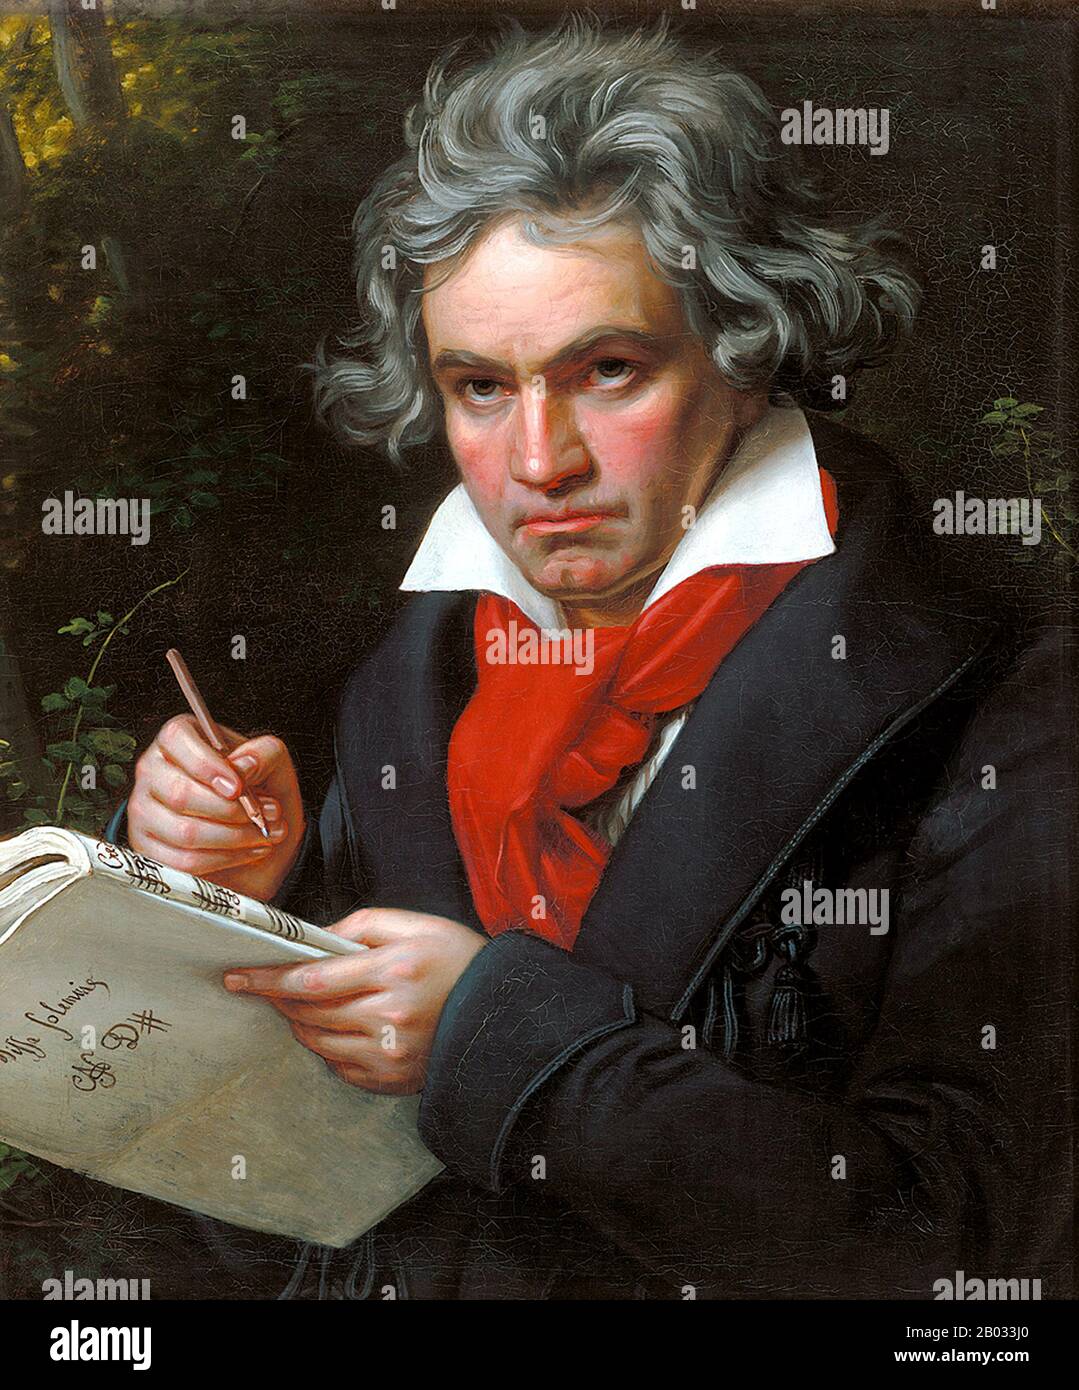 Ludwig van Beethoven (17 December 1770 – 26 March 1827) was a German composer. A crucial figure in the transition between the Classical and Romantic eras in Western art music, he remains one of the most famous and influential of all composers.  His best-known compositions include 9 symphonies, 5 piano concertos, 1 violin concerto, 32 piano sonatas, 16 string quartets, his great Mass the Missa solemnis and an opera, Fidelio. Stock Photo